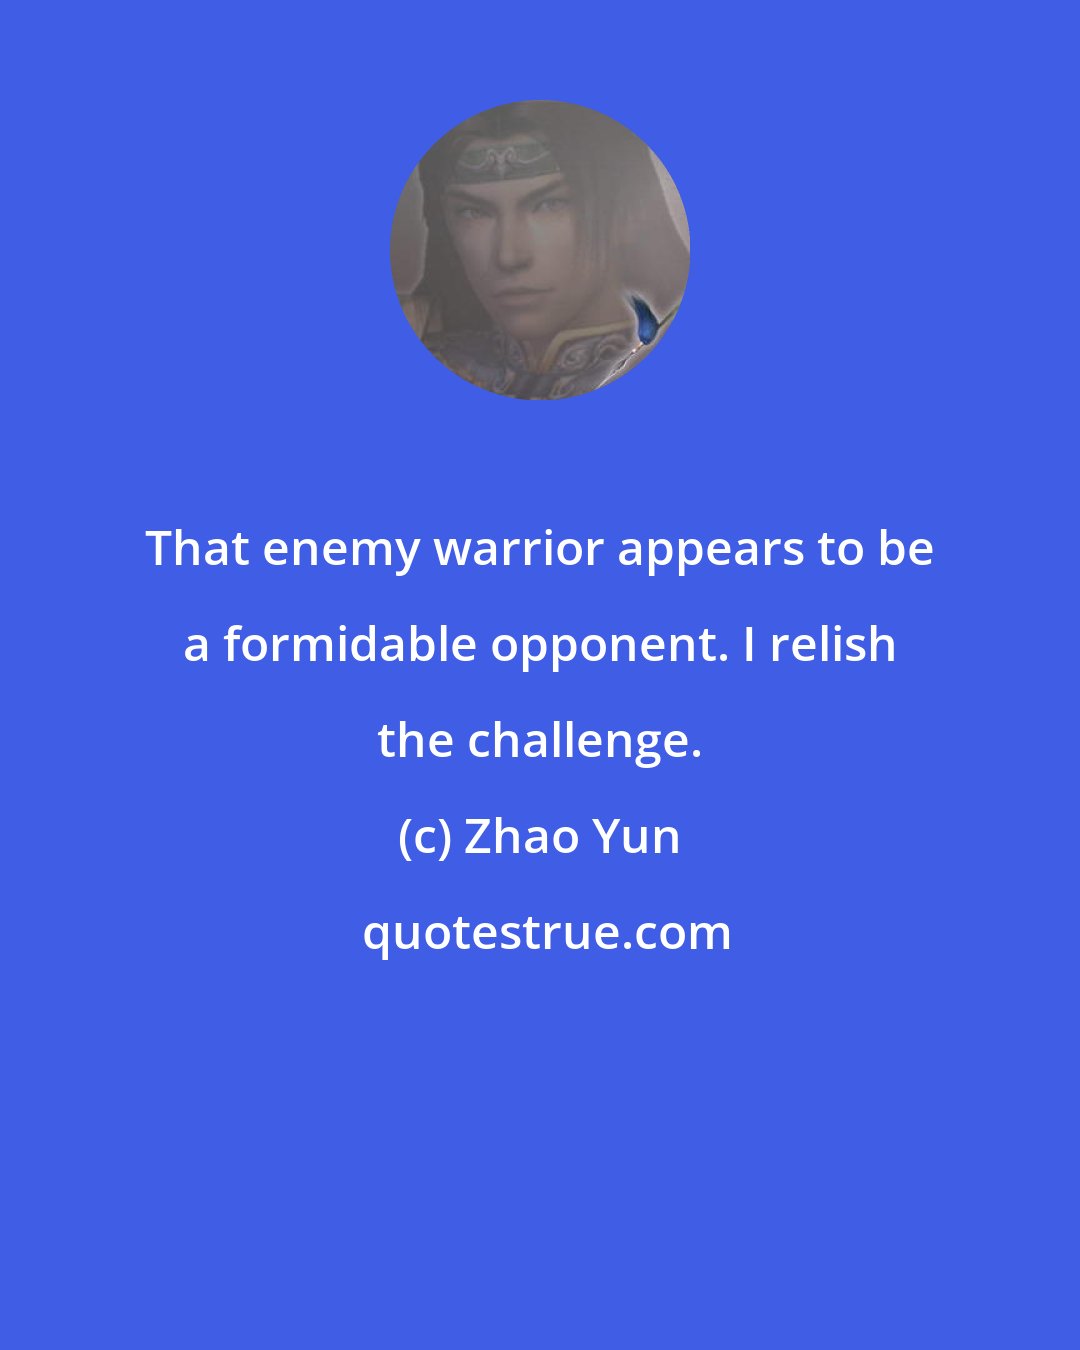 Zhao Yun: That enemy warrior appears to be a formidable opponent. I relish the challenge.